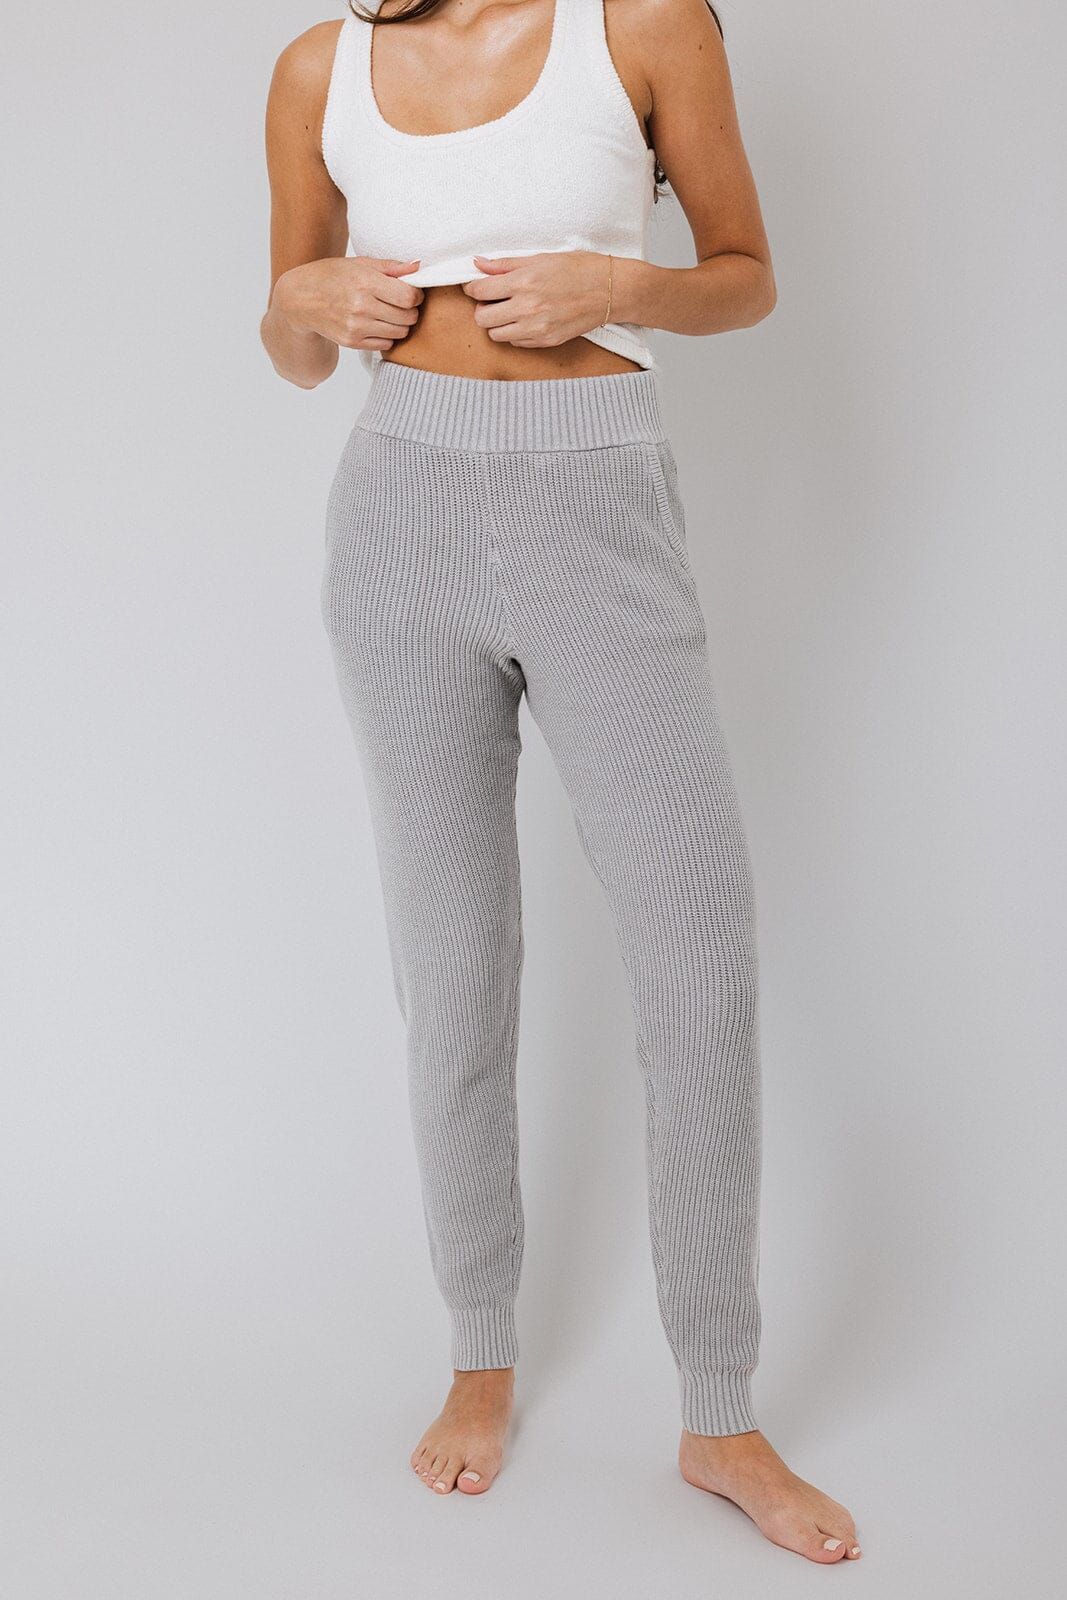 Sweater Jogger | IVL COLLECTIVE